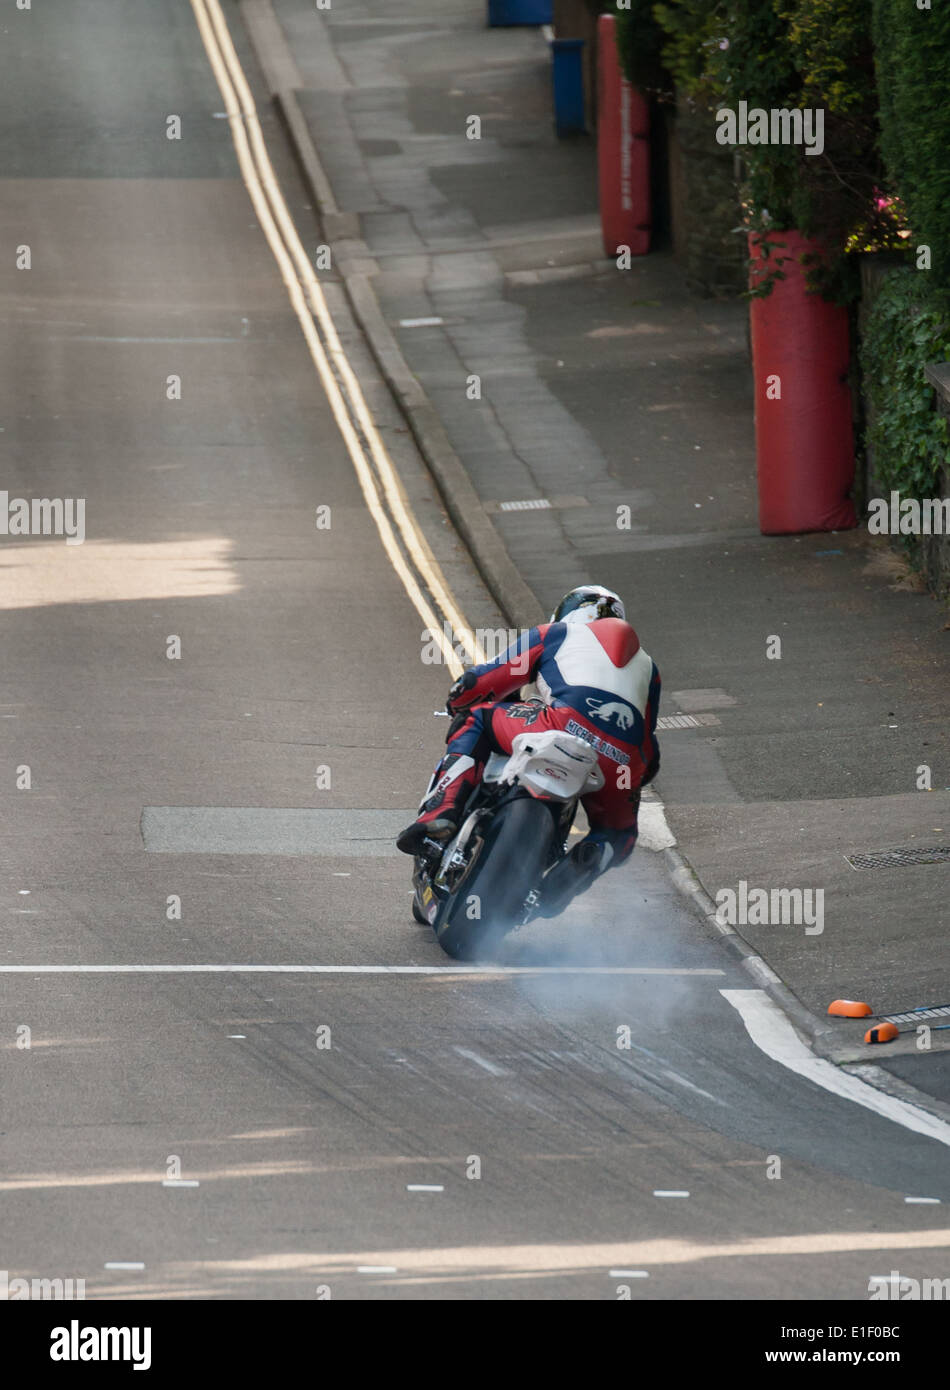 Michael Dunlop's Hawk Racing prepared BMW bottoms out at the bottom of Bray Hill during IOM TT 2014 practice week. Stock Photo